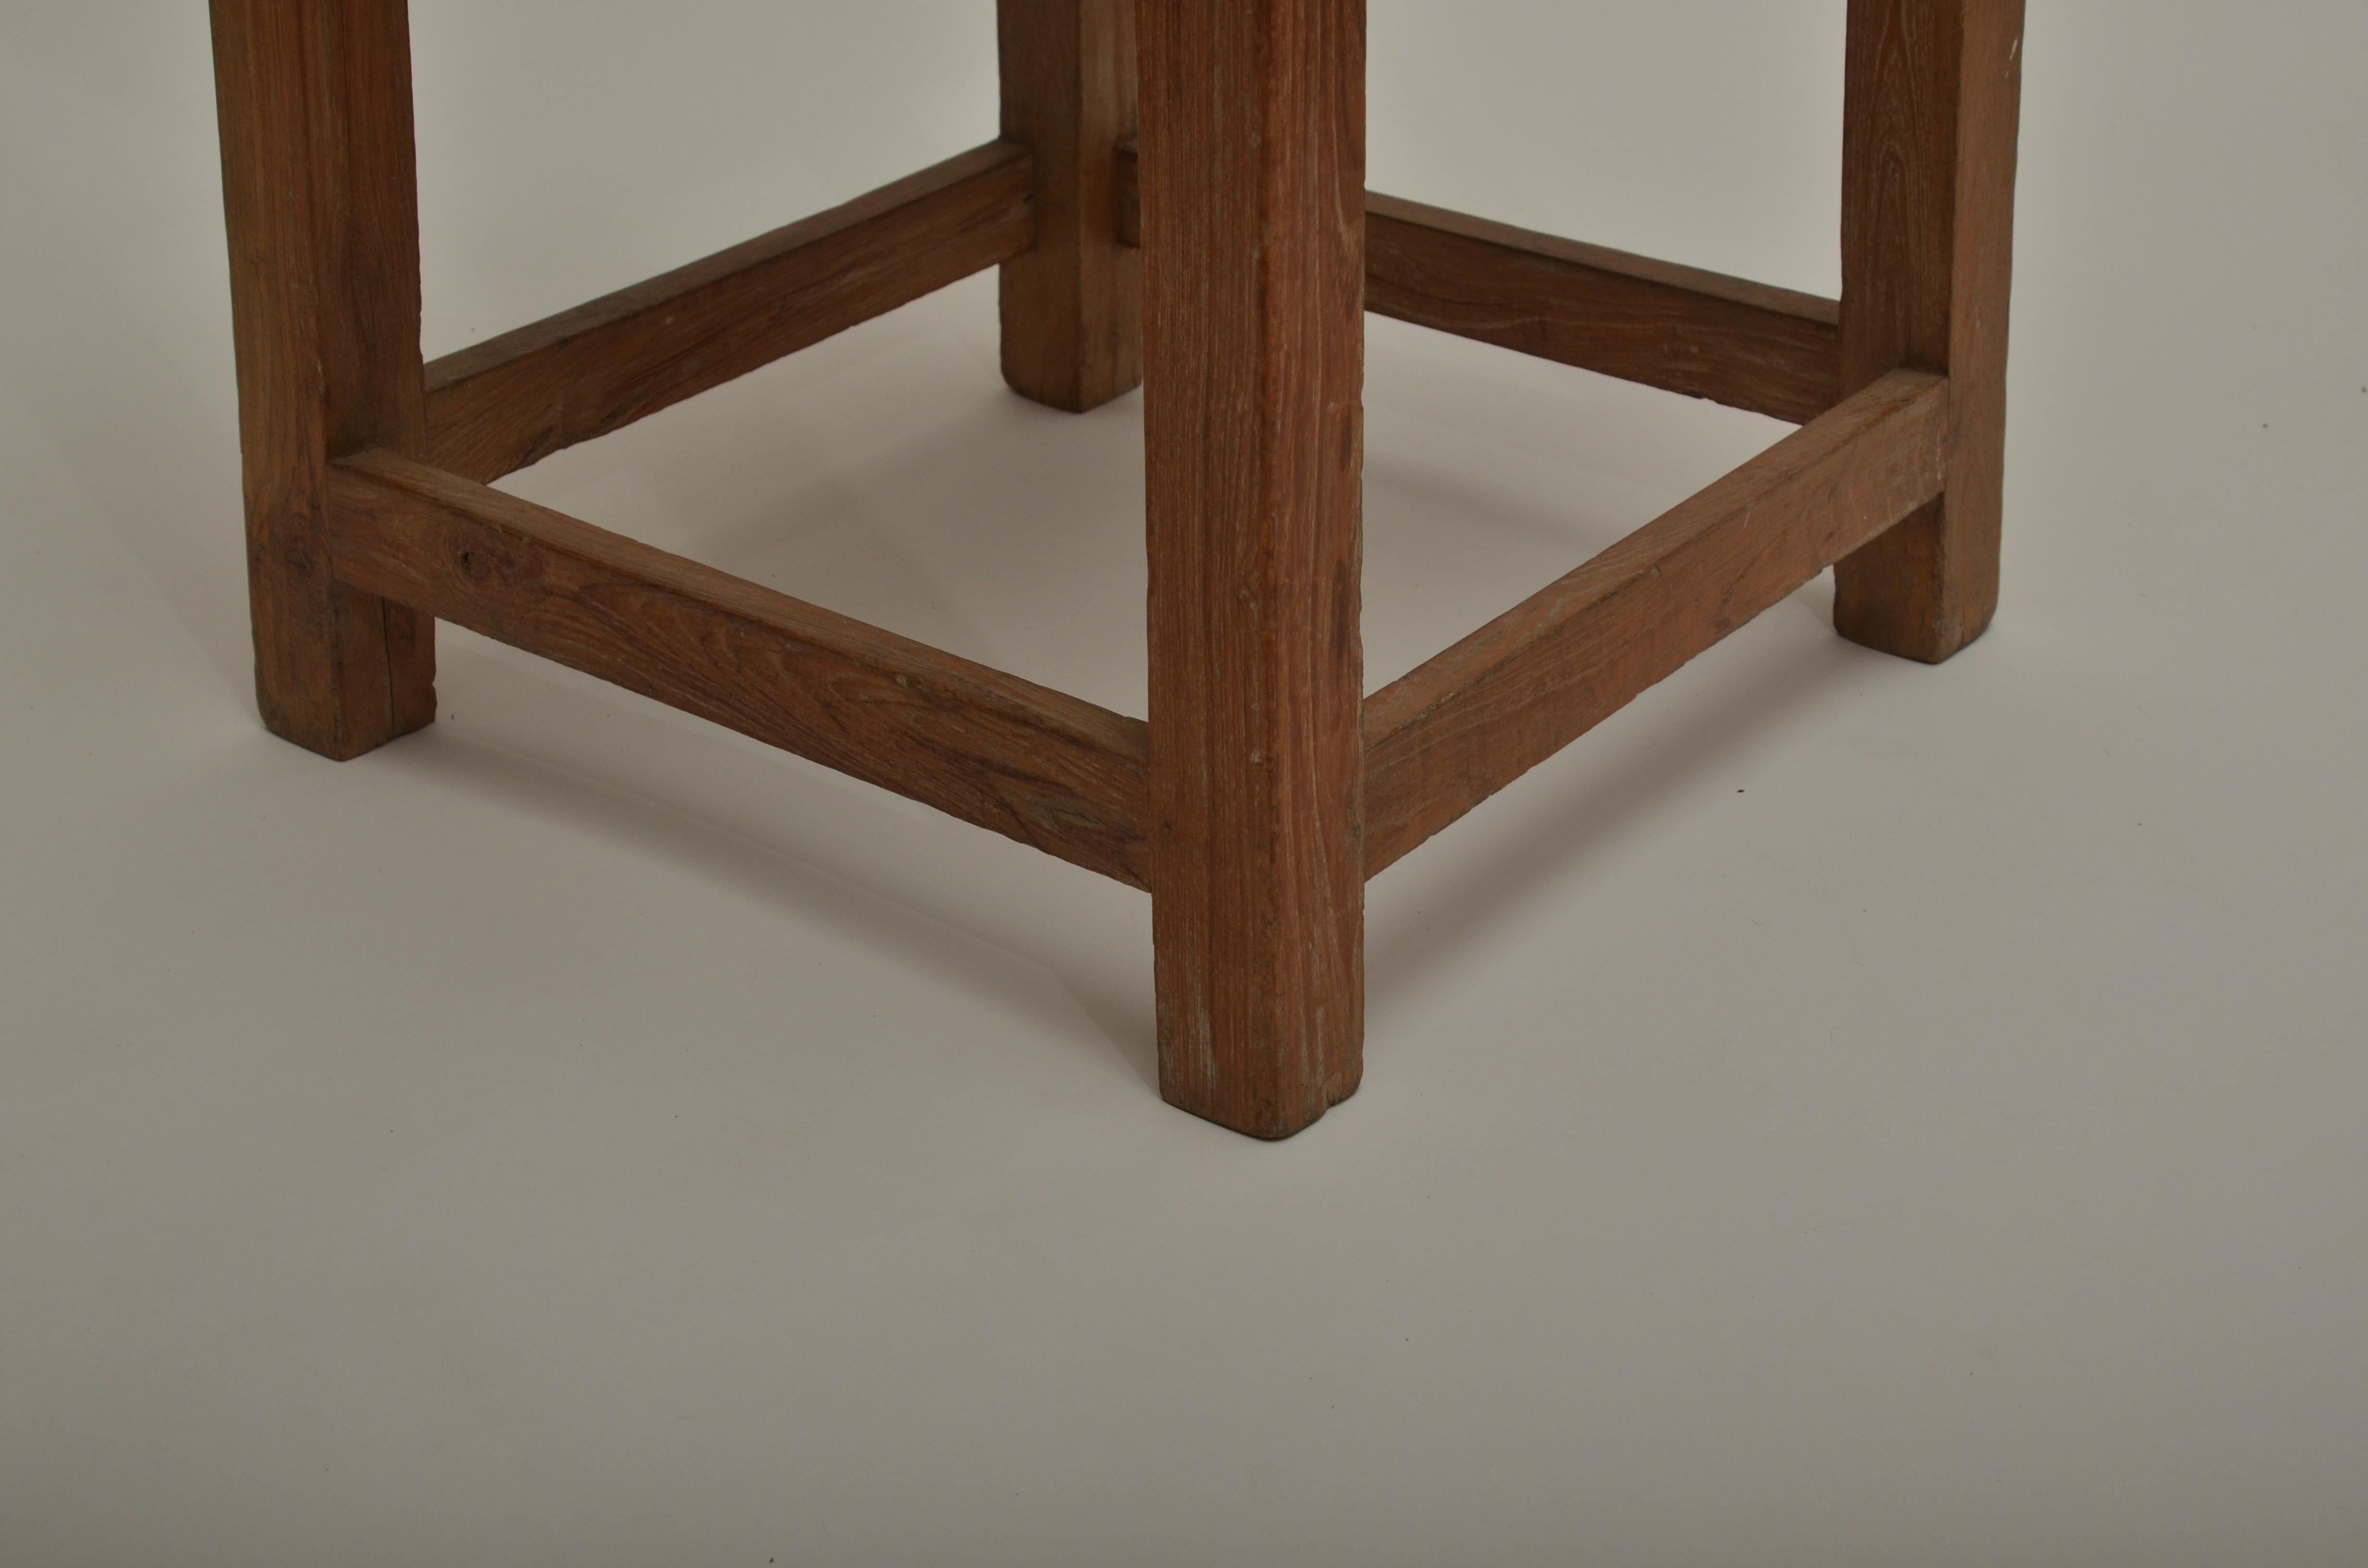 Two plank side table with cleated ends.